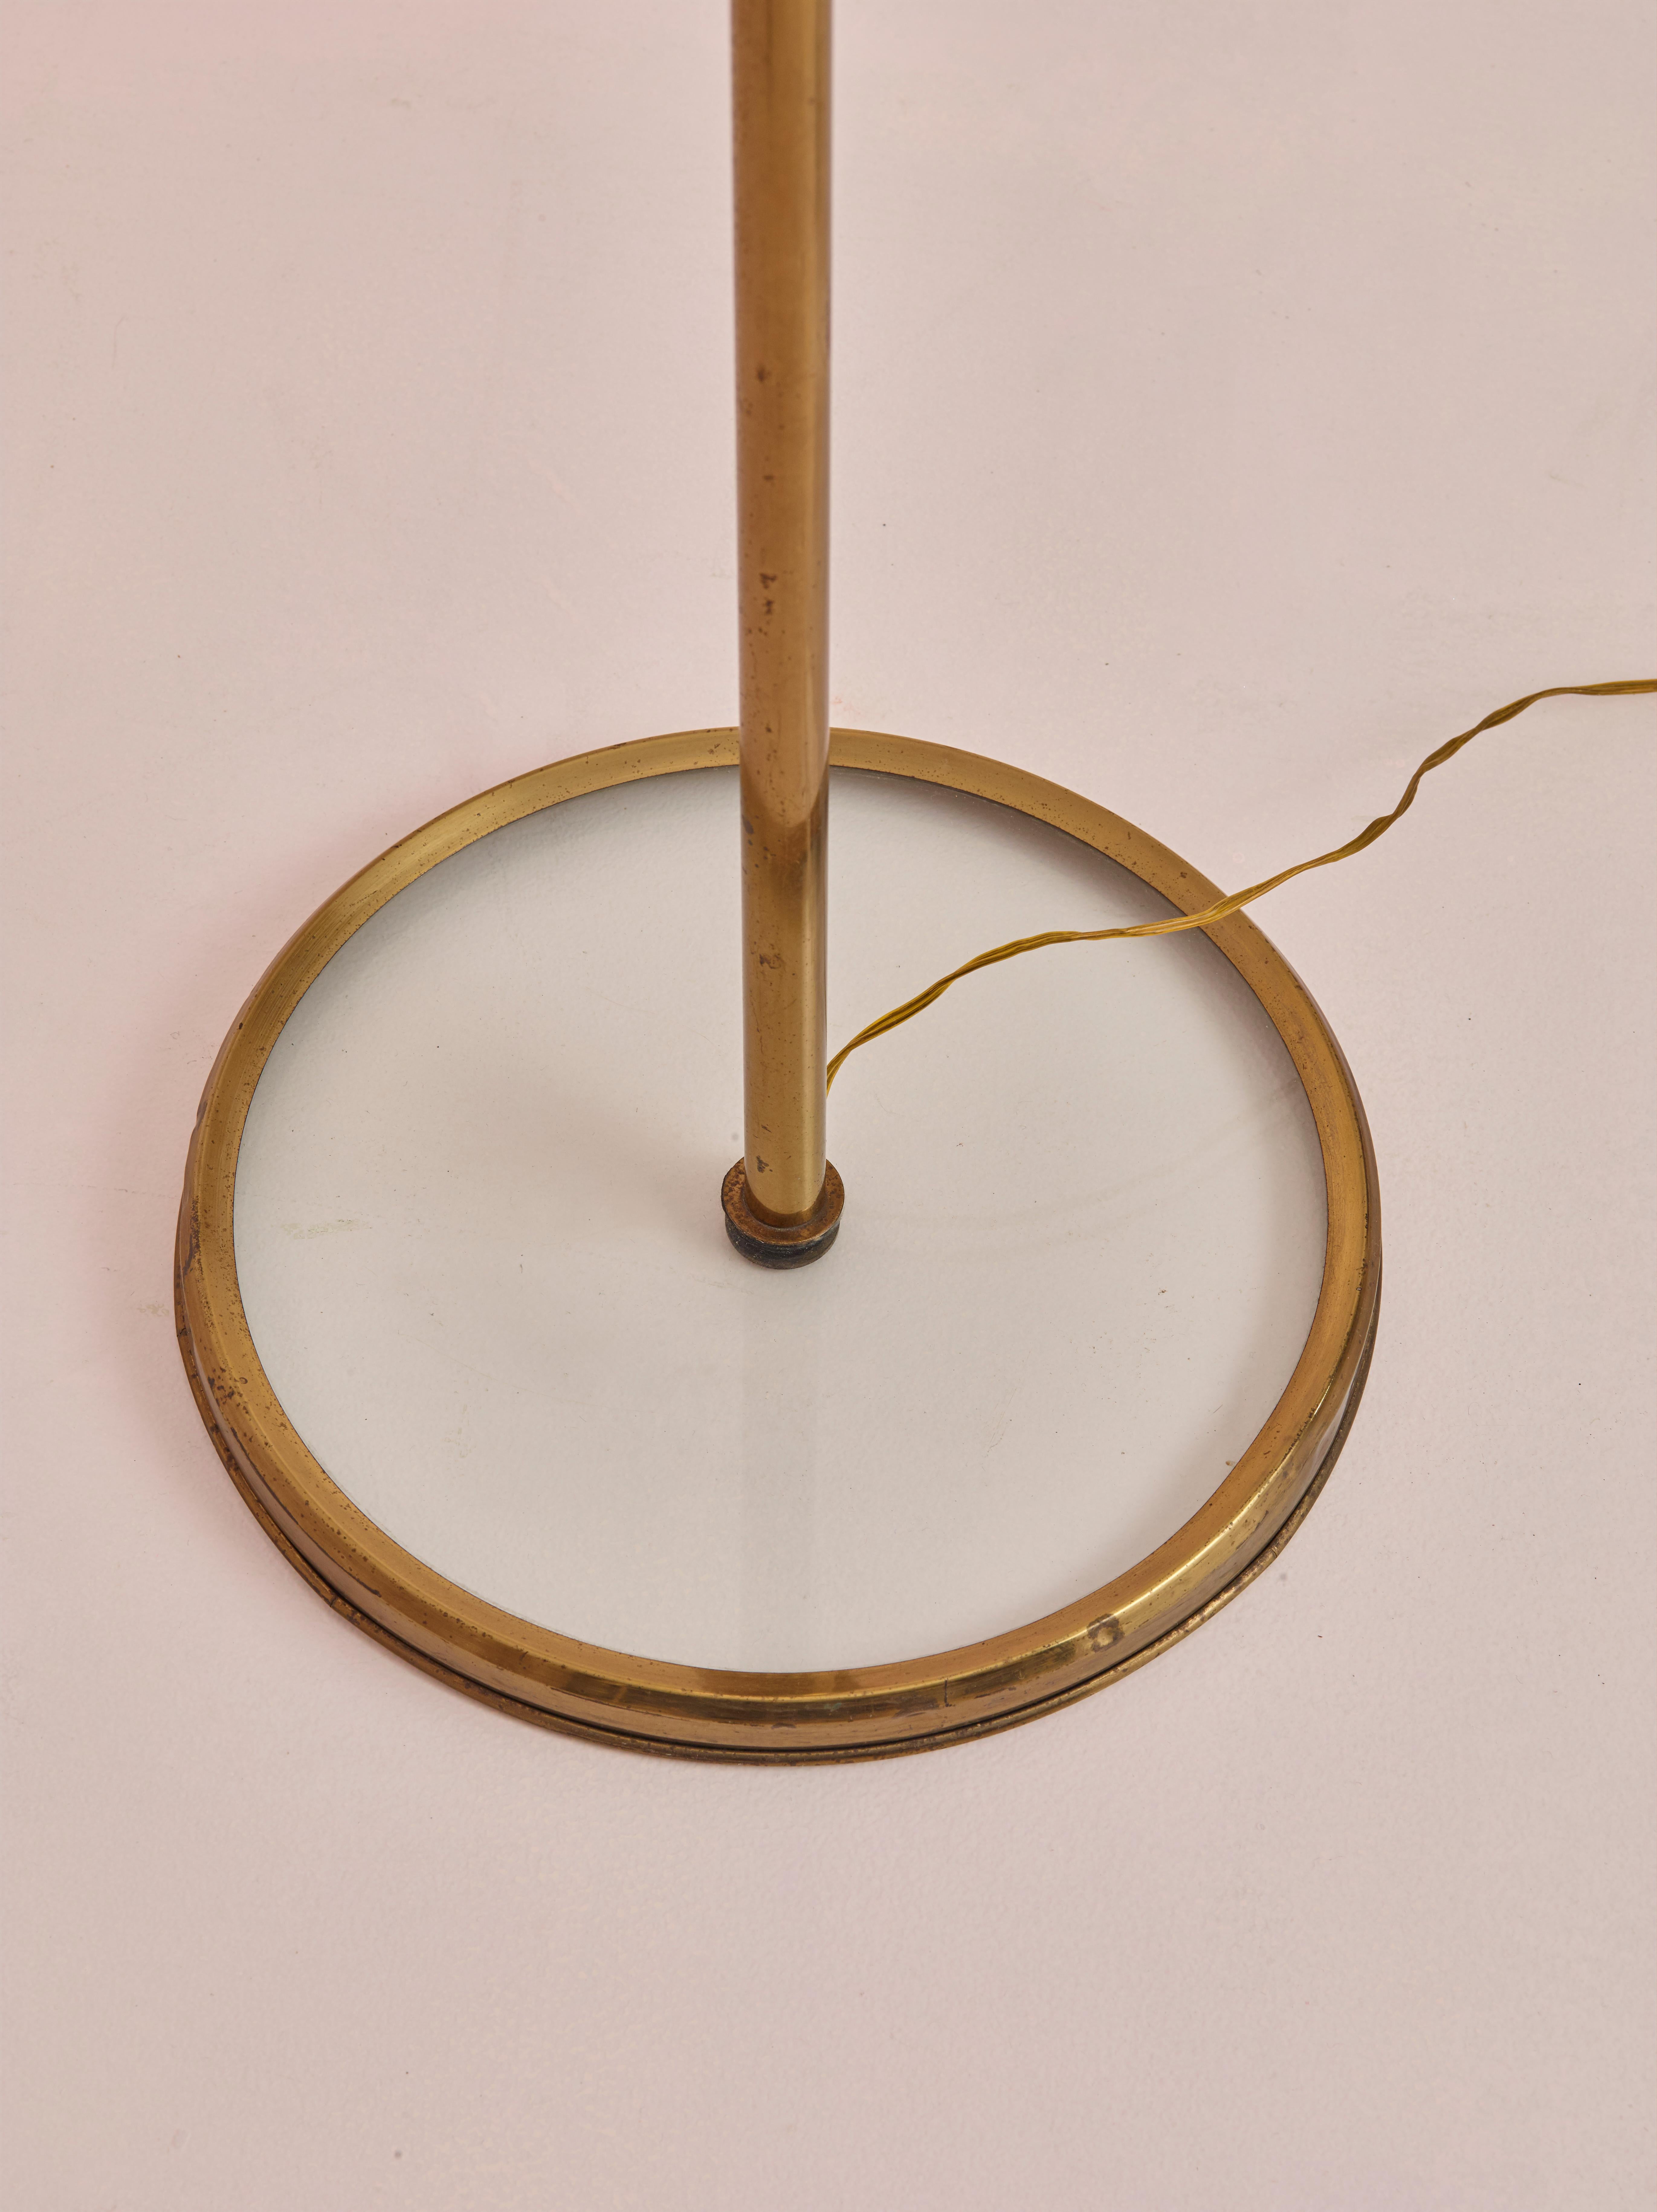 Mid-20th Century Floor Lamp by Max Ingrand Model 2003 for Fontana Arte, Made in Glass and Brass For Sale